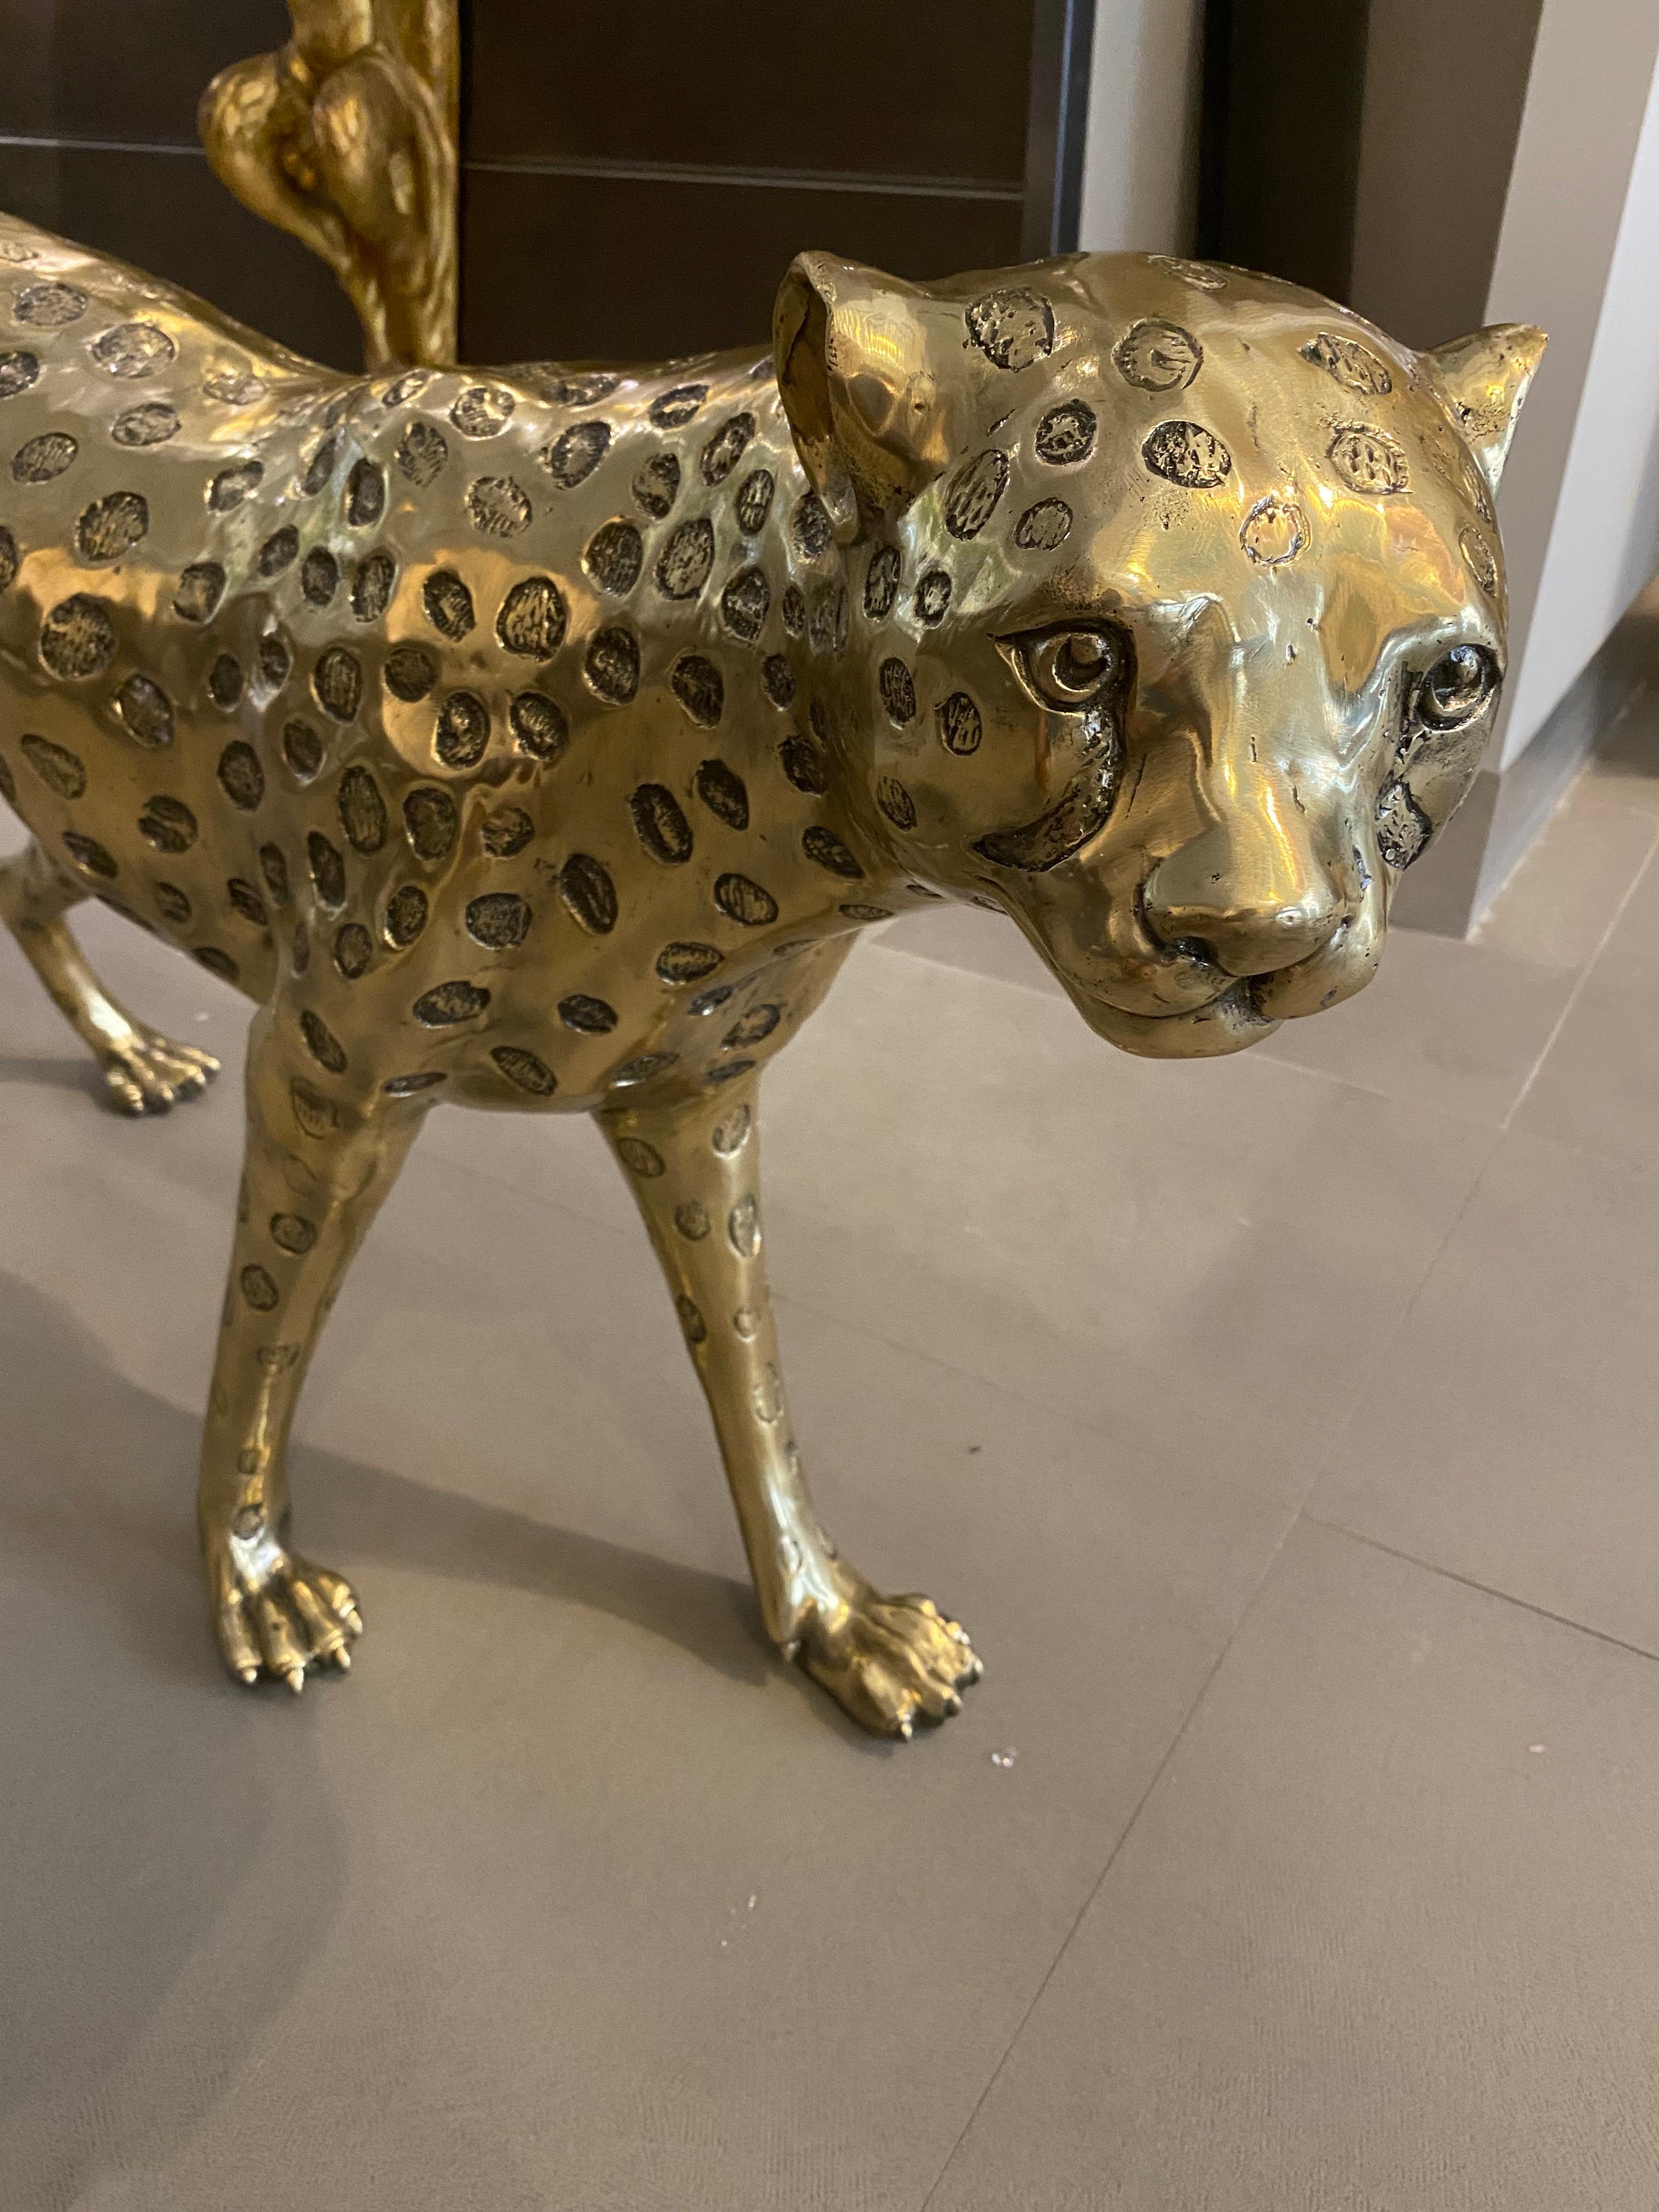 Fantastic gilt brass leopard sculpture . The item will be well-suited to either an indoor or outdoor setting.